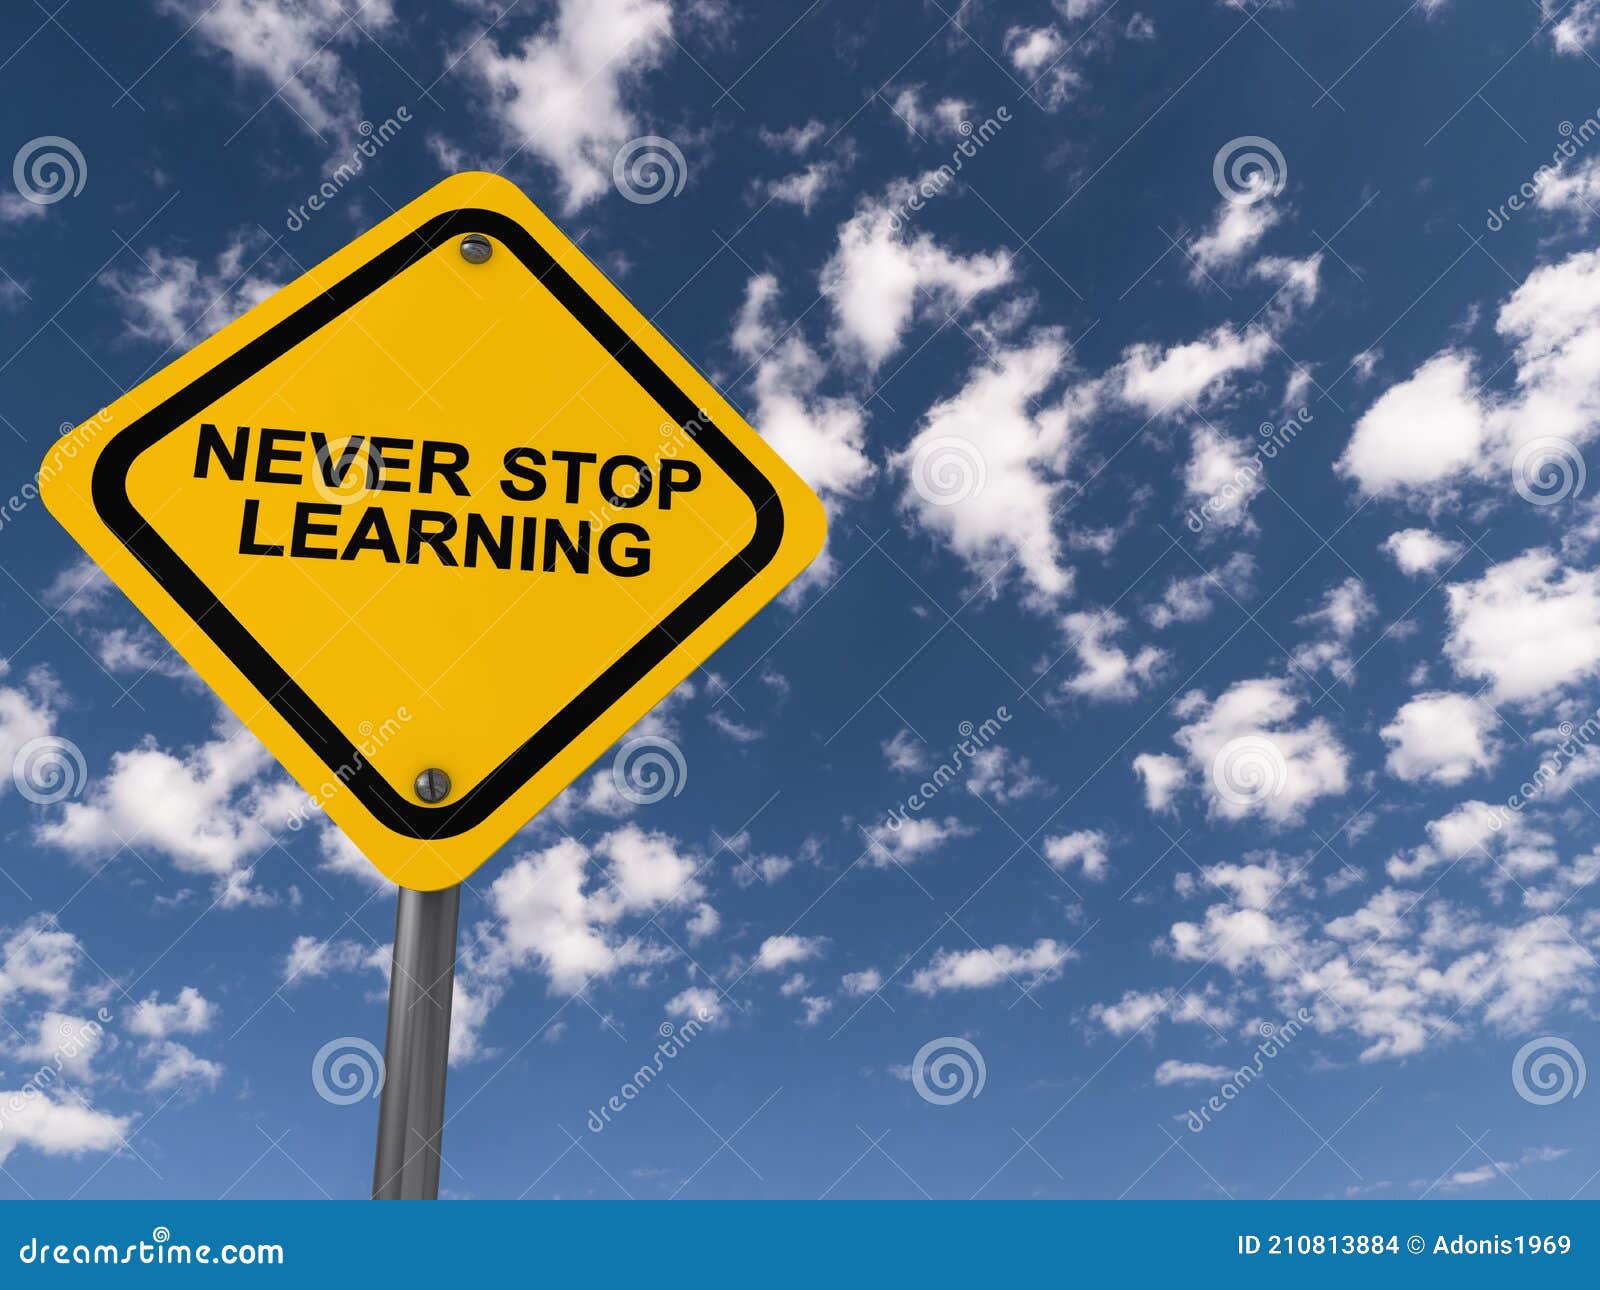 never stop learning traffic sign